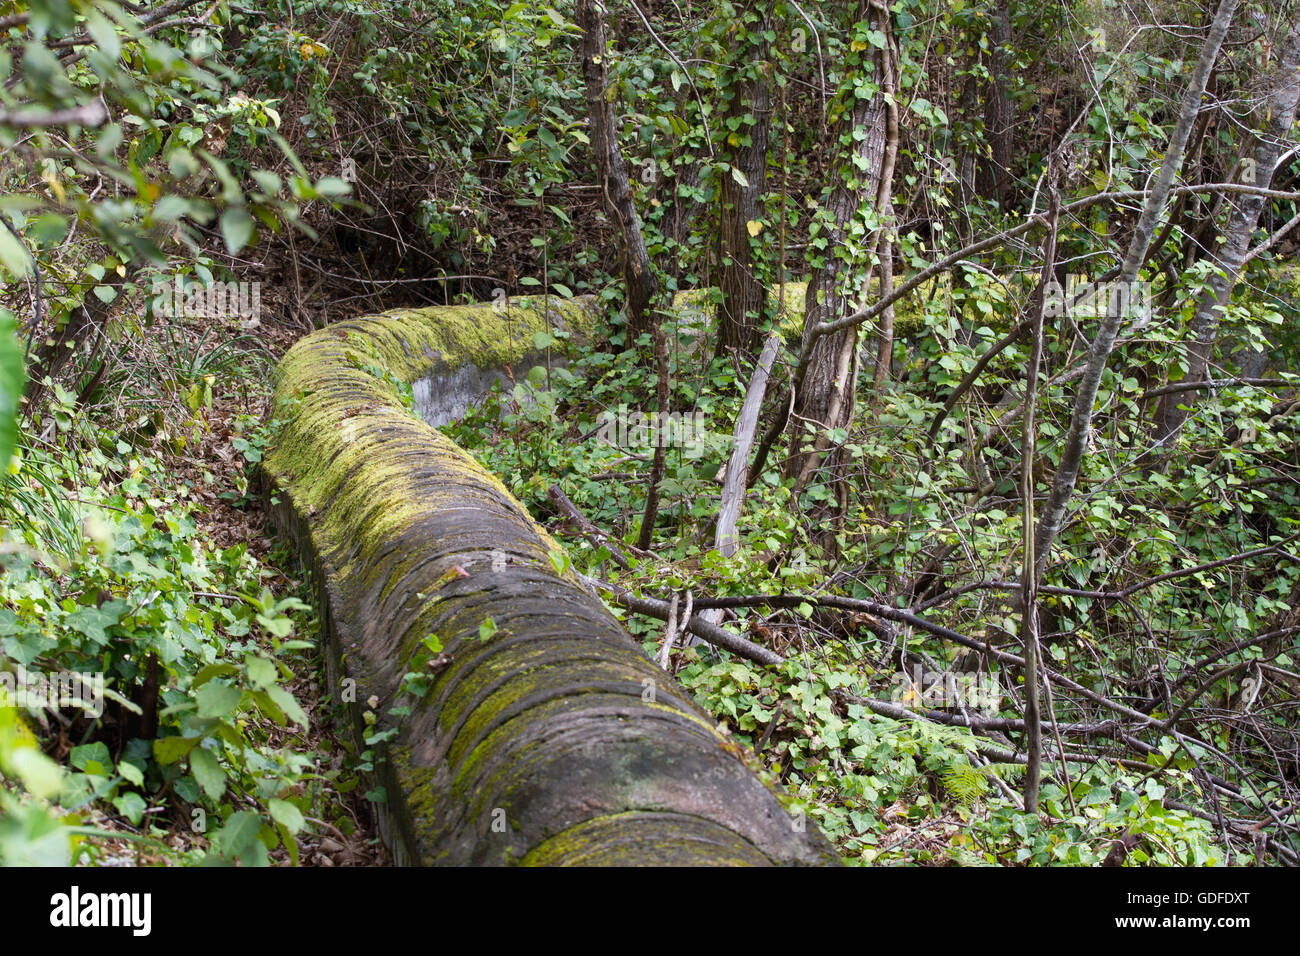 Ancient stone aqueduct in pine forest near the town of Los Realejos, Tenerife, Spain Stock Photo